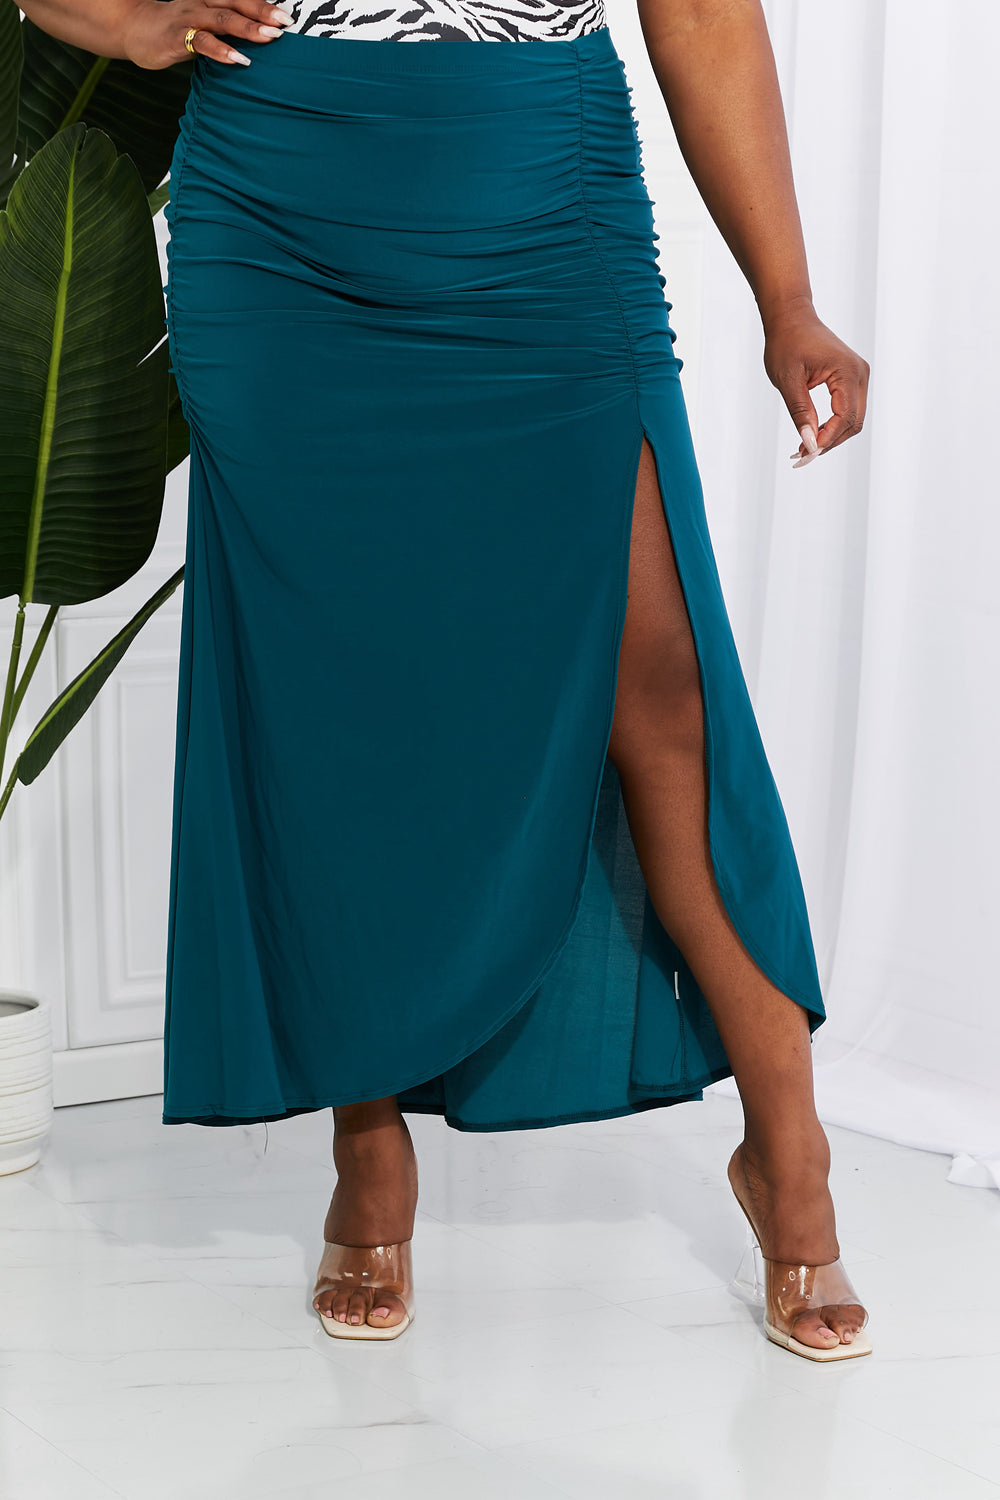 White Birch Full Size Up and Up Ruched Slit Maxi Skirt in Teal Trendsi